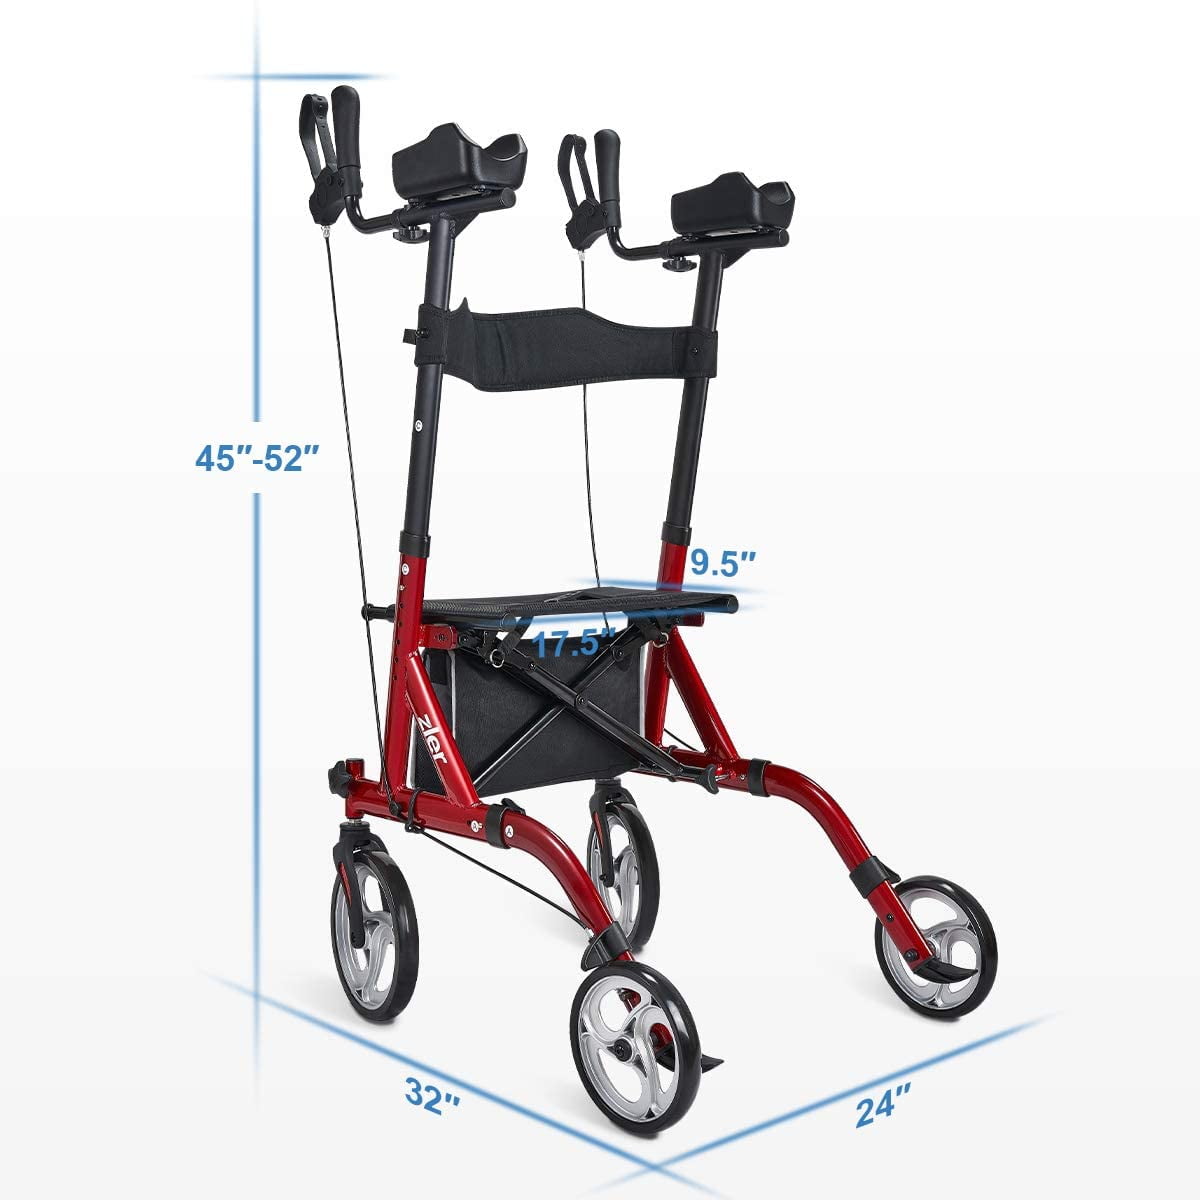 Zler Armrest Tall Walker with 10” Front Wheels, Stand Up Folding Rollator Walker Back Rolling Mobility Walking Aid with Backrest and Padded Armrests for Elderly, Seniors and Adults, Red and Black